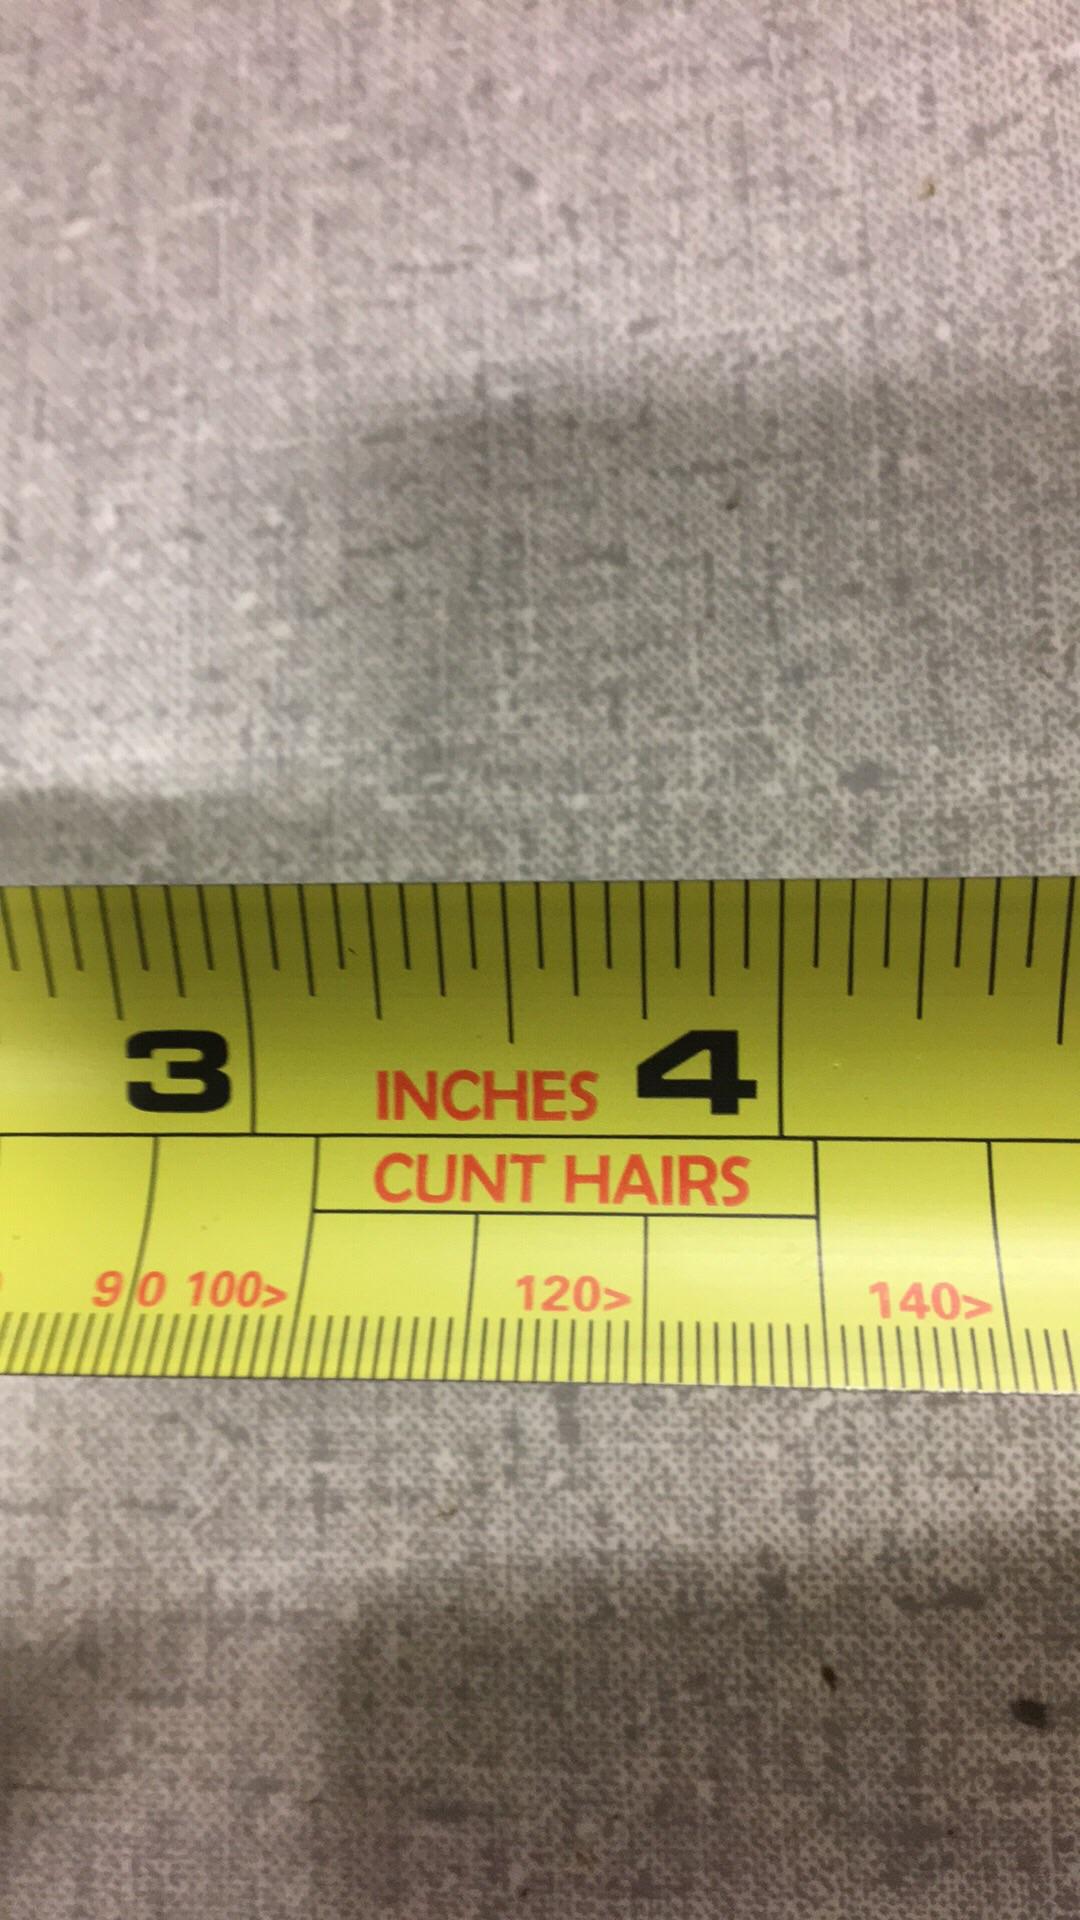 Ratman reccomend Guy measures his dick with ruler